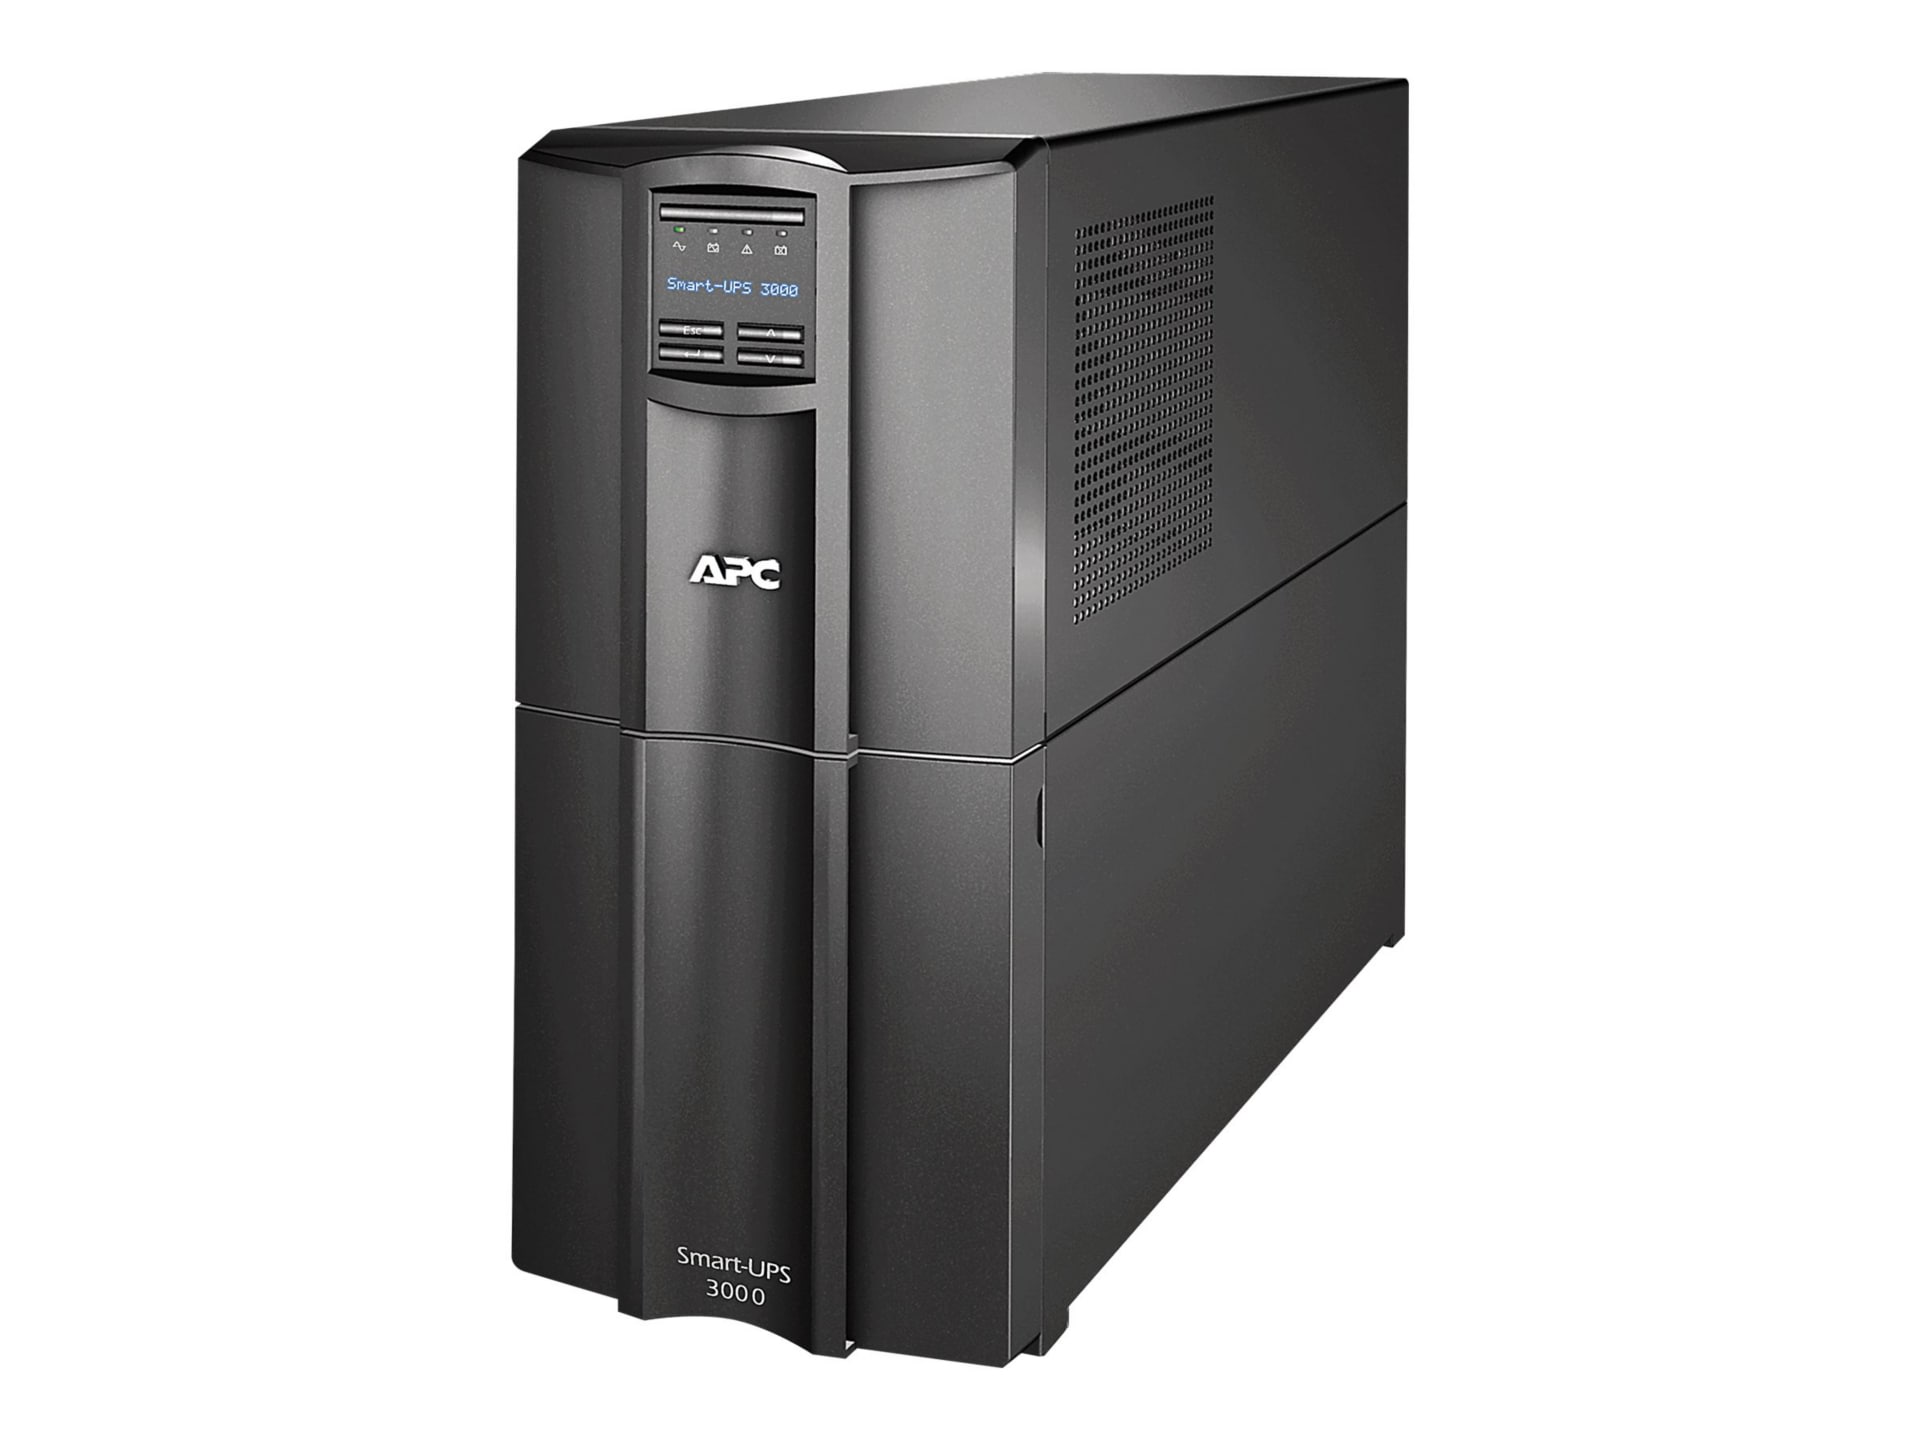 APC by Schneider Electric Smart-UPS 3000VA LCD 120V with